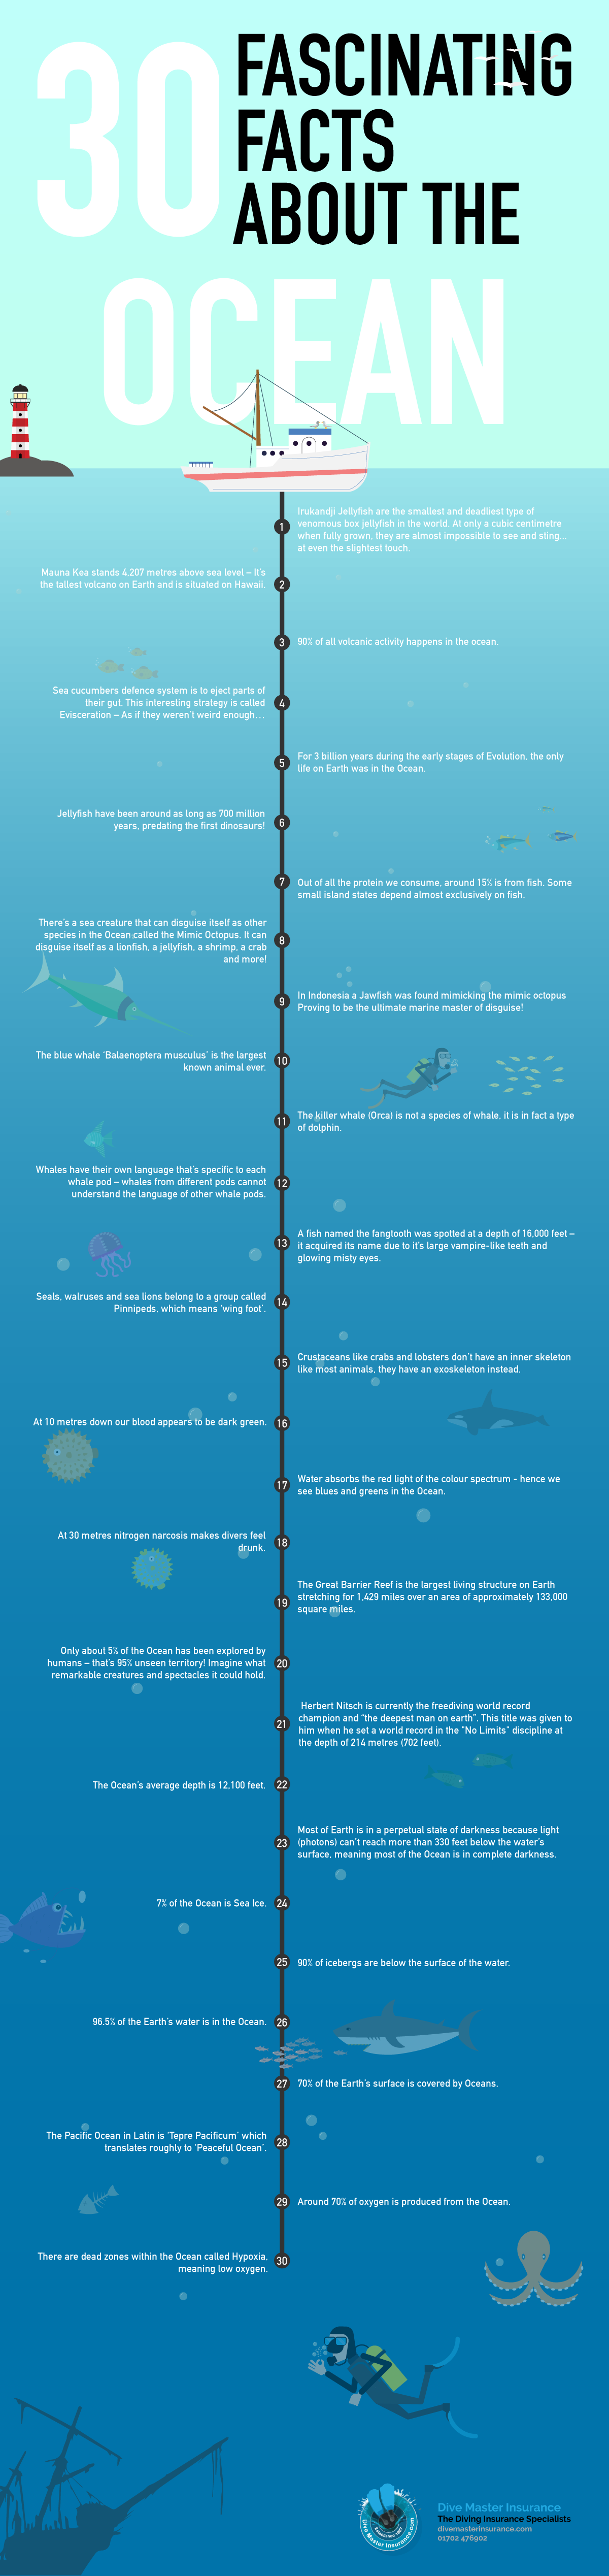 facts about ocean tourism